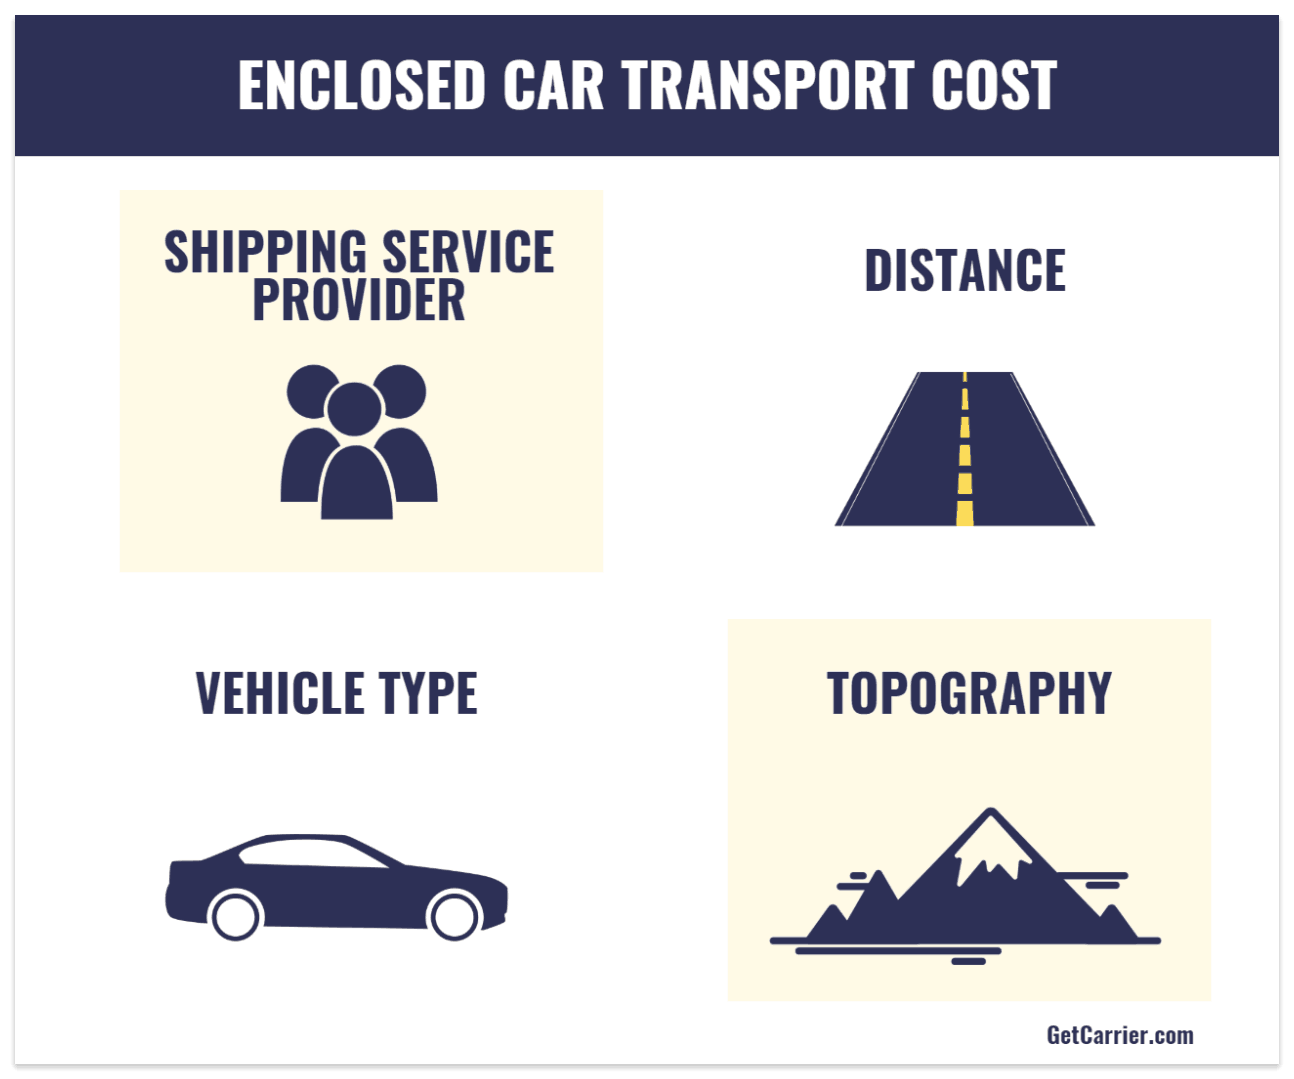 Ship Car Across Country: enclosed car transport cost